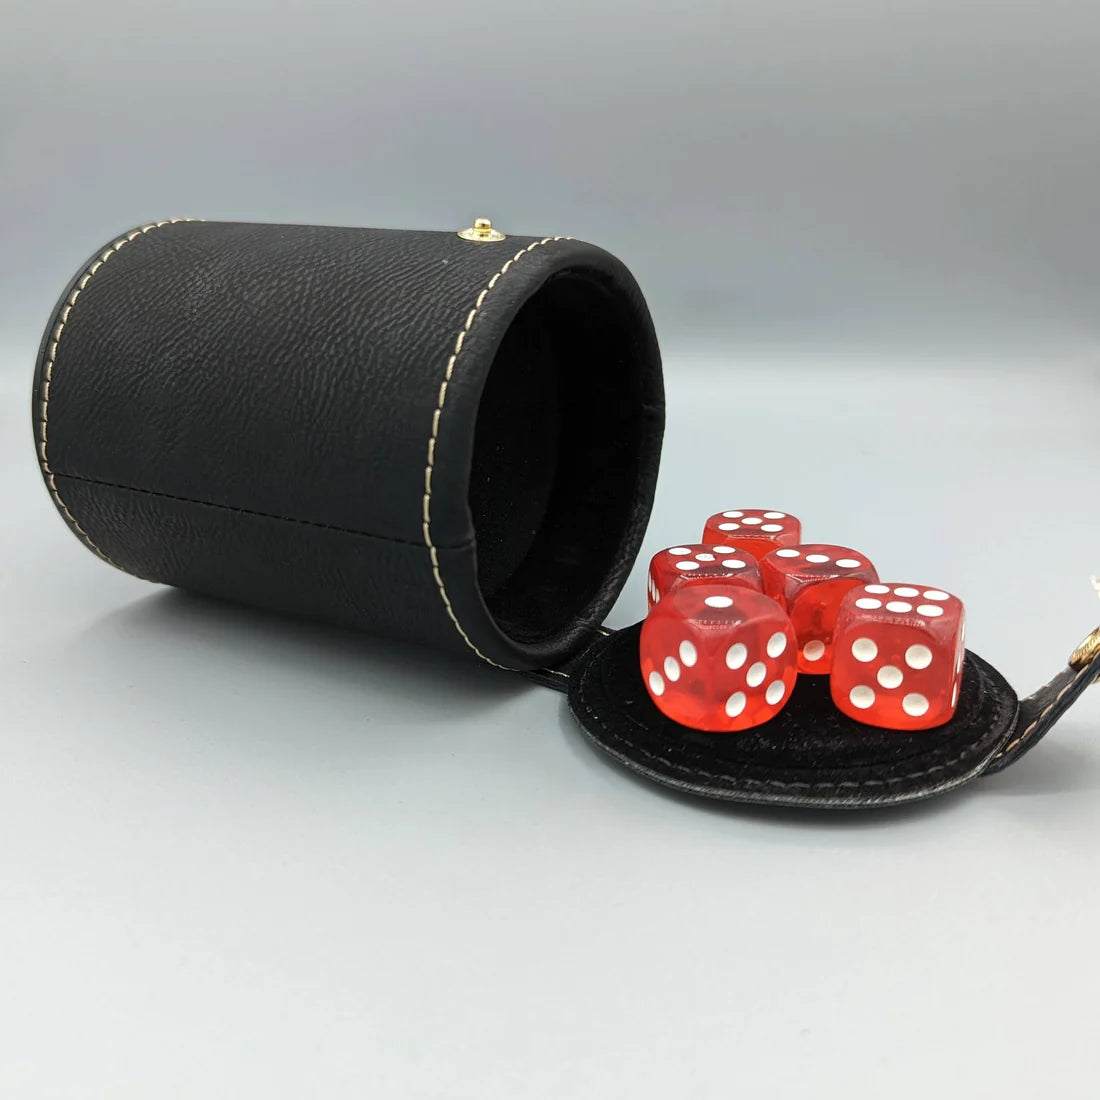 InDiPro - Dice Cup with Storage